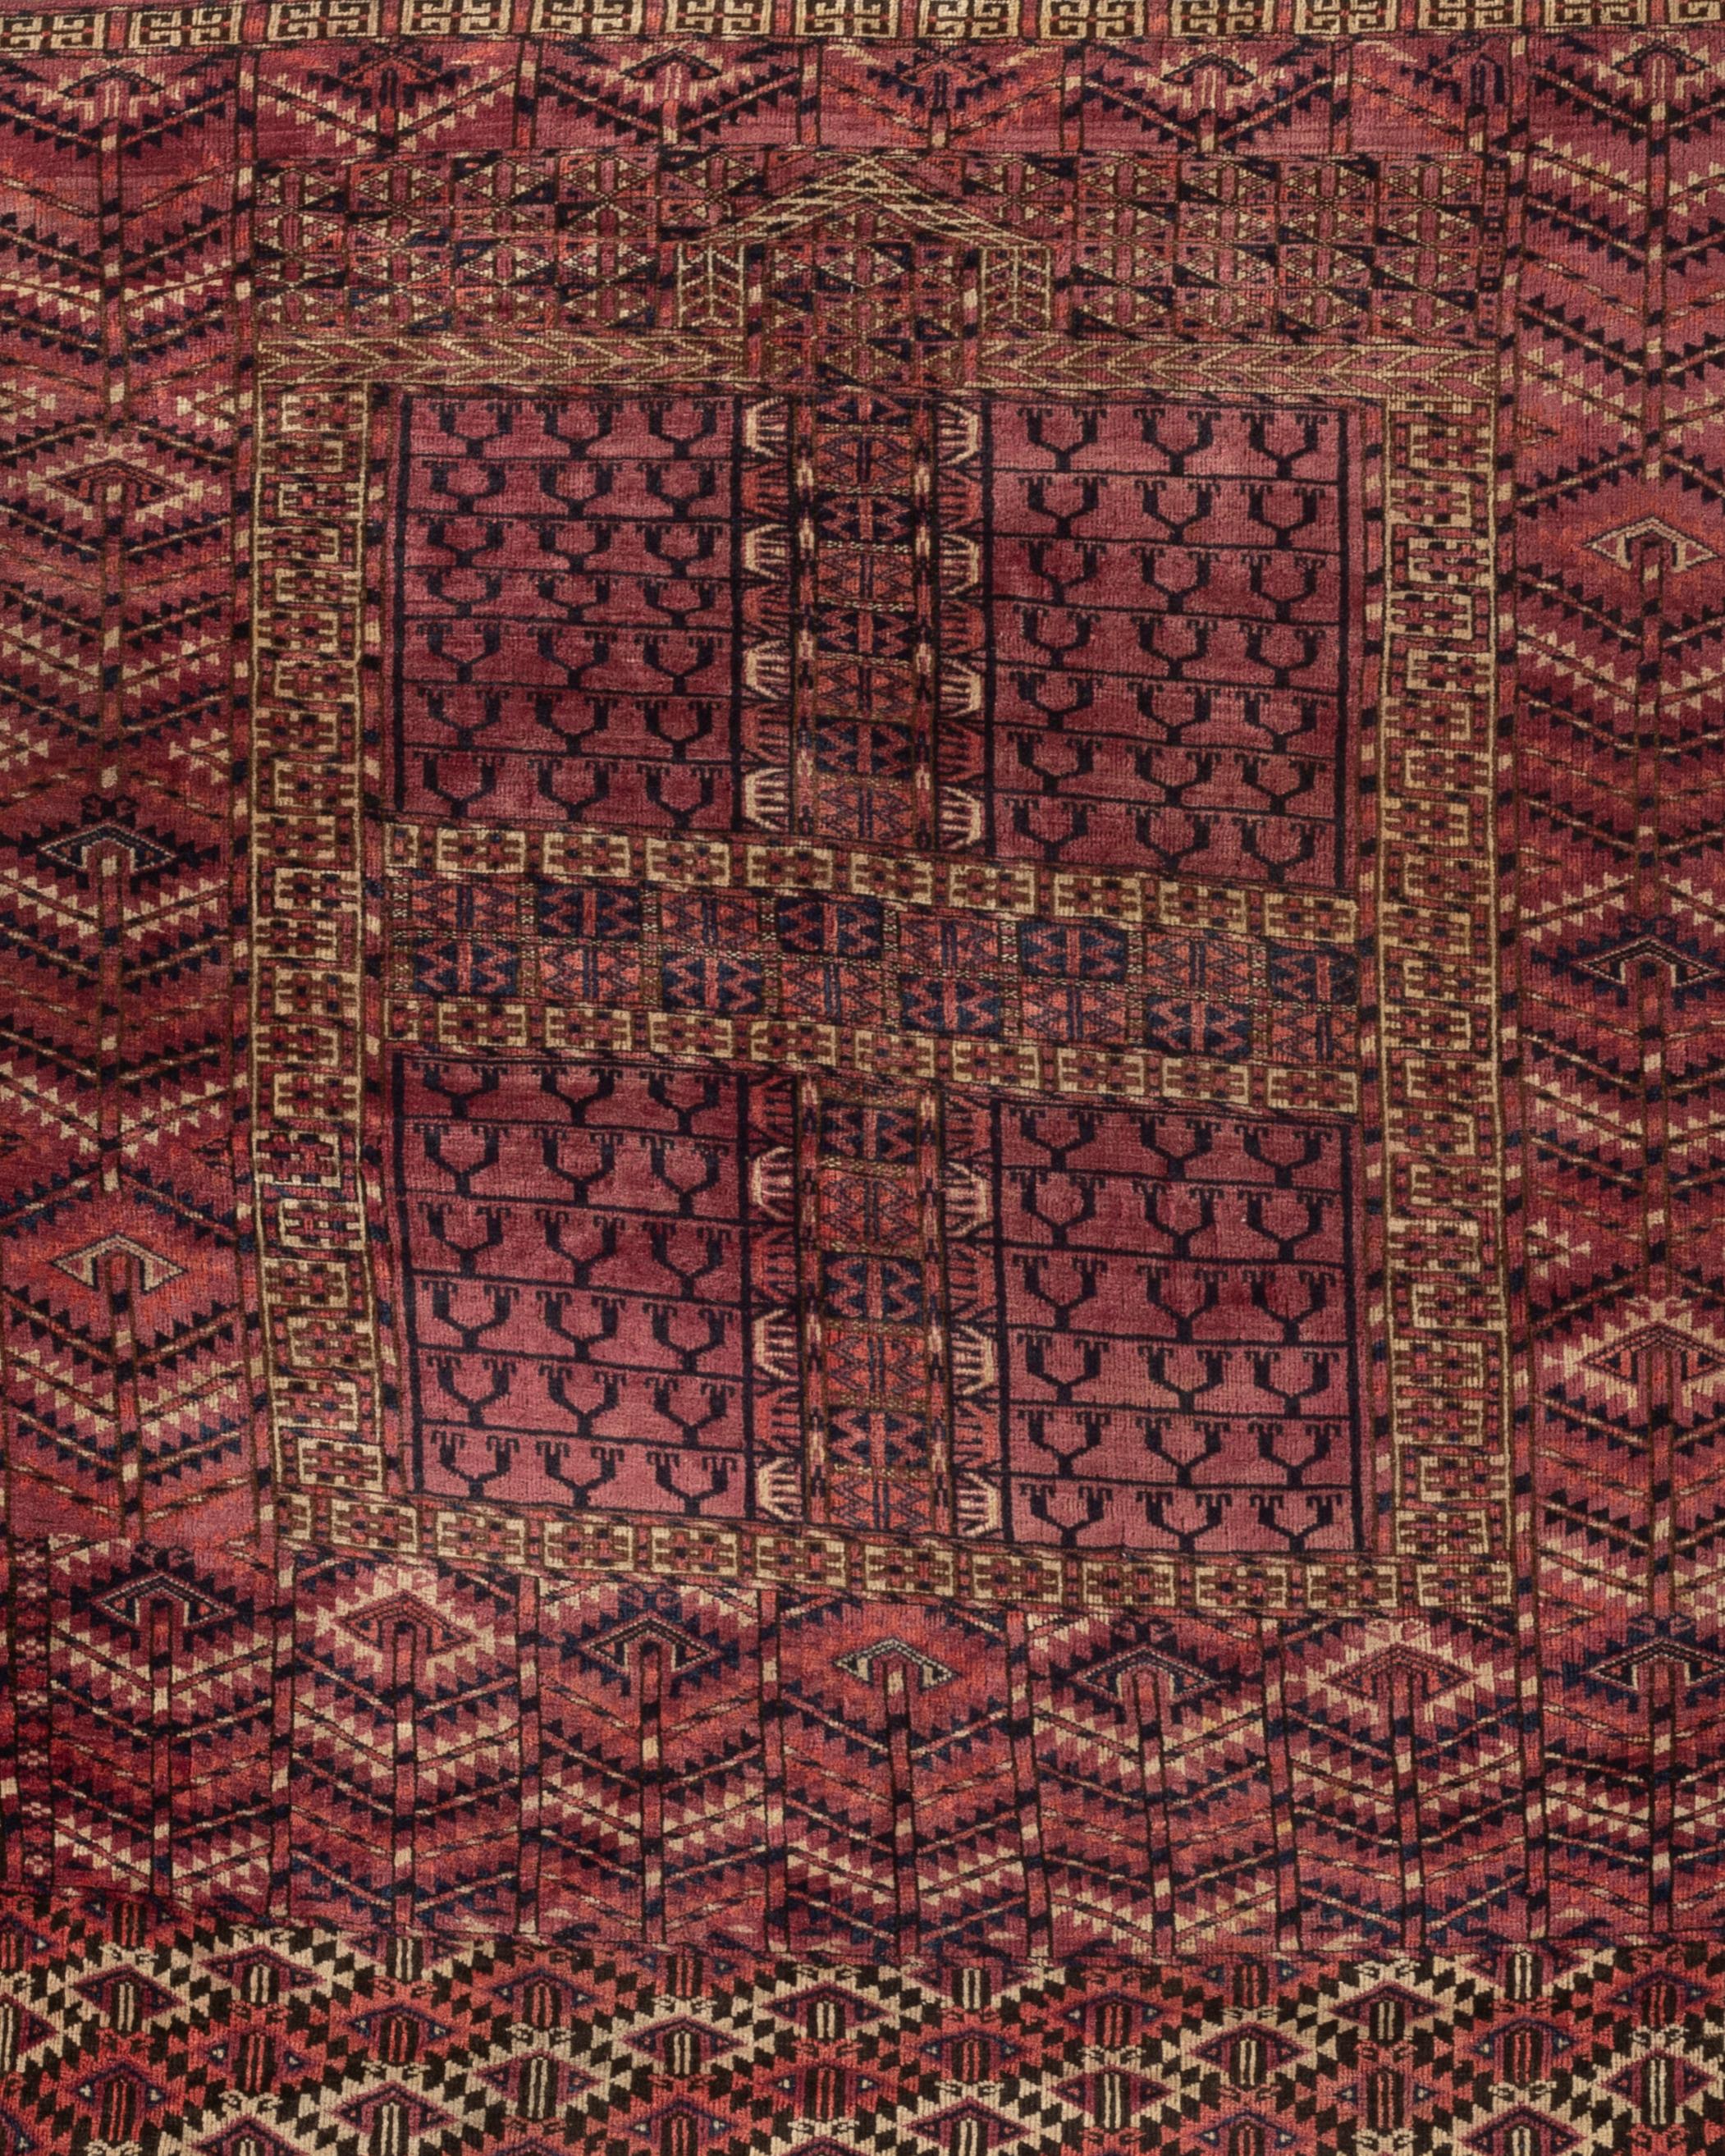 Antique Hachlo Bokhara rug, circa 1880. Bokara or Bokhara rugs are named after the city where they were sold. These rugs were made by Turkoman tribes, and these weavers gave the rug its distinctive design. At the end of the 20th century, carpet